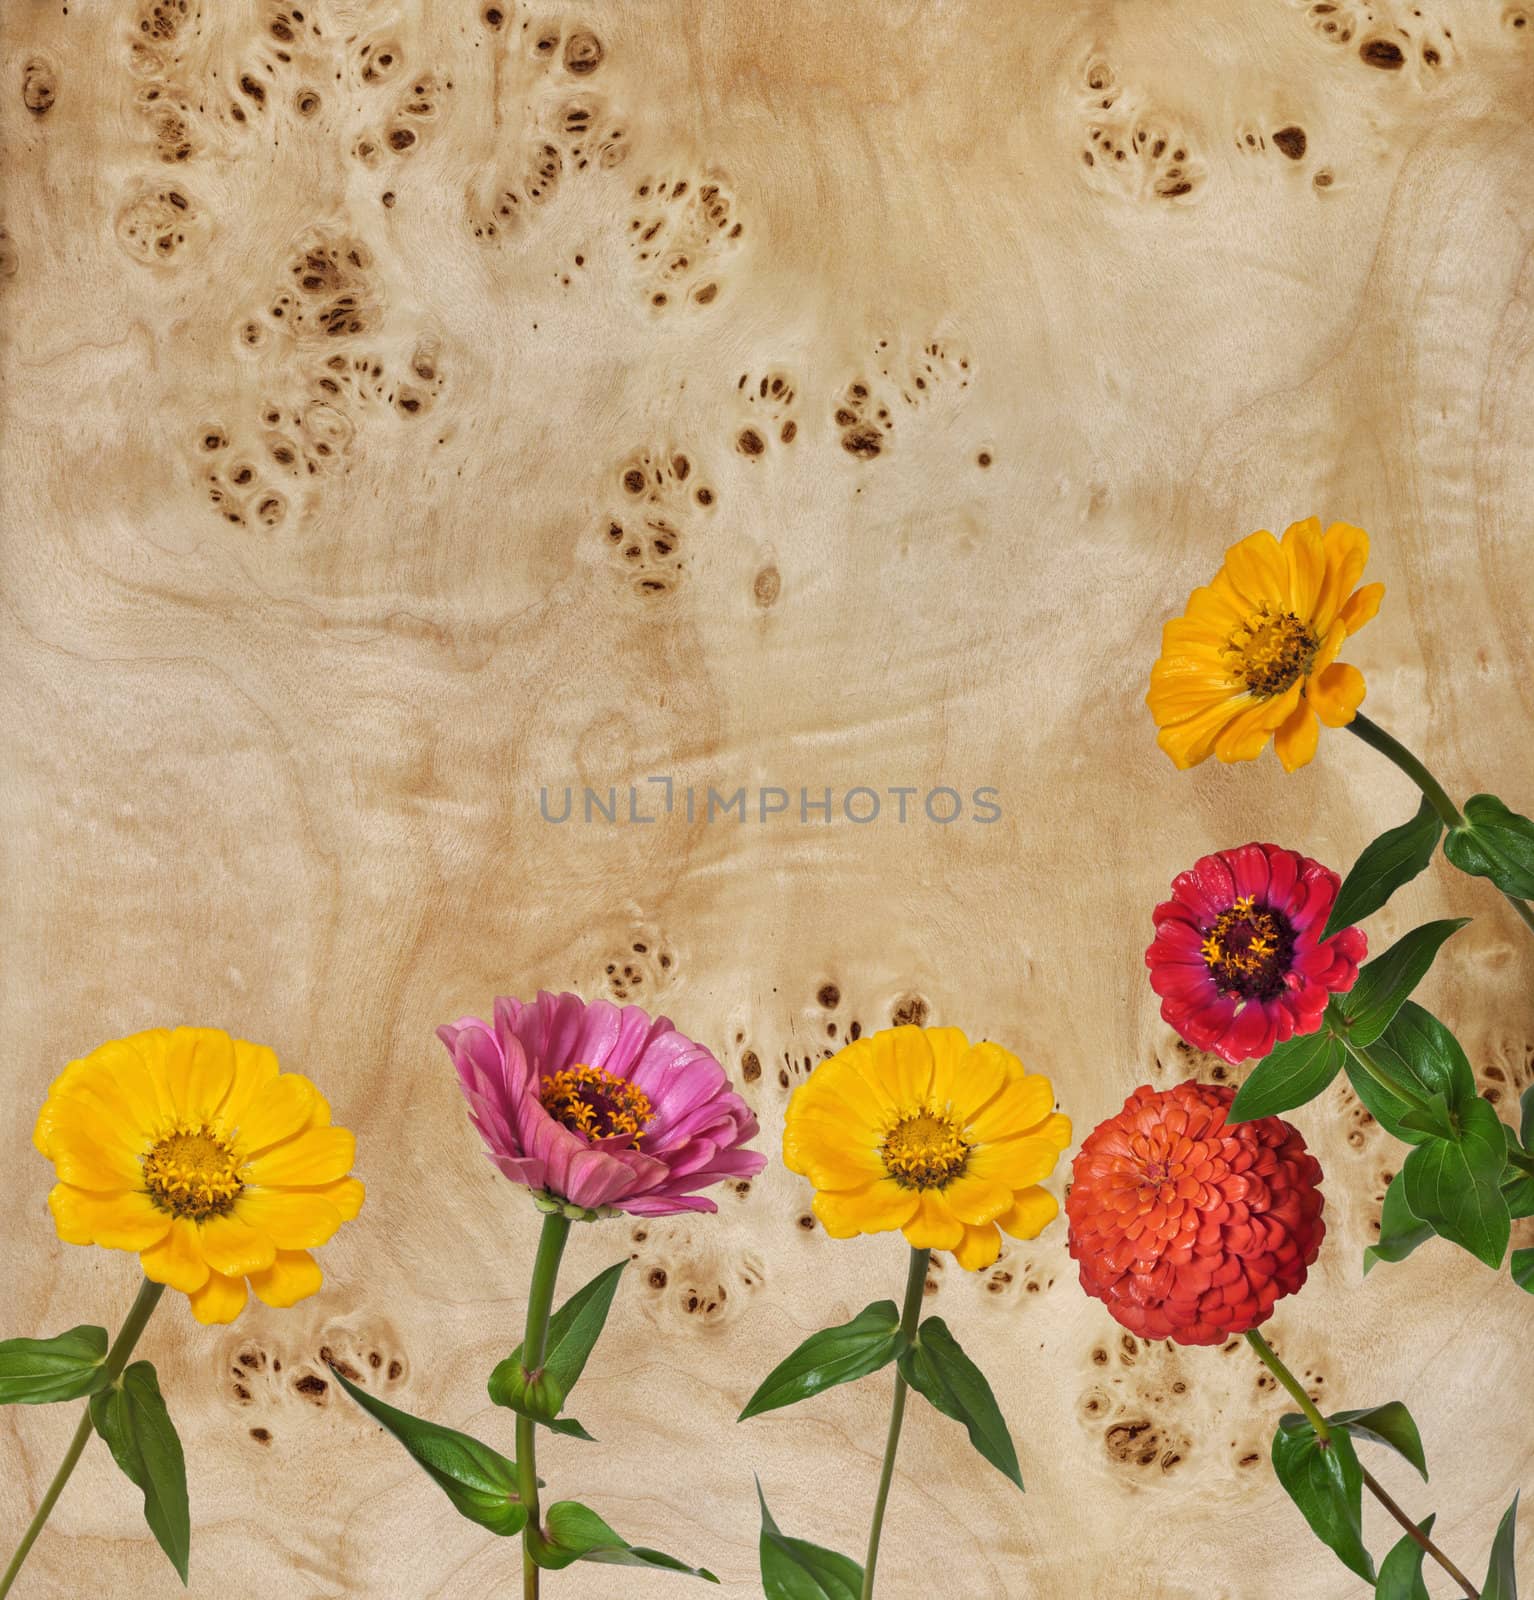 Flowers Zinnia and root of a poplar by alexcoolok